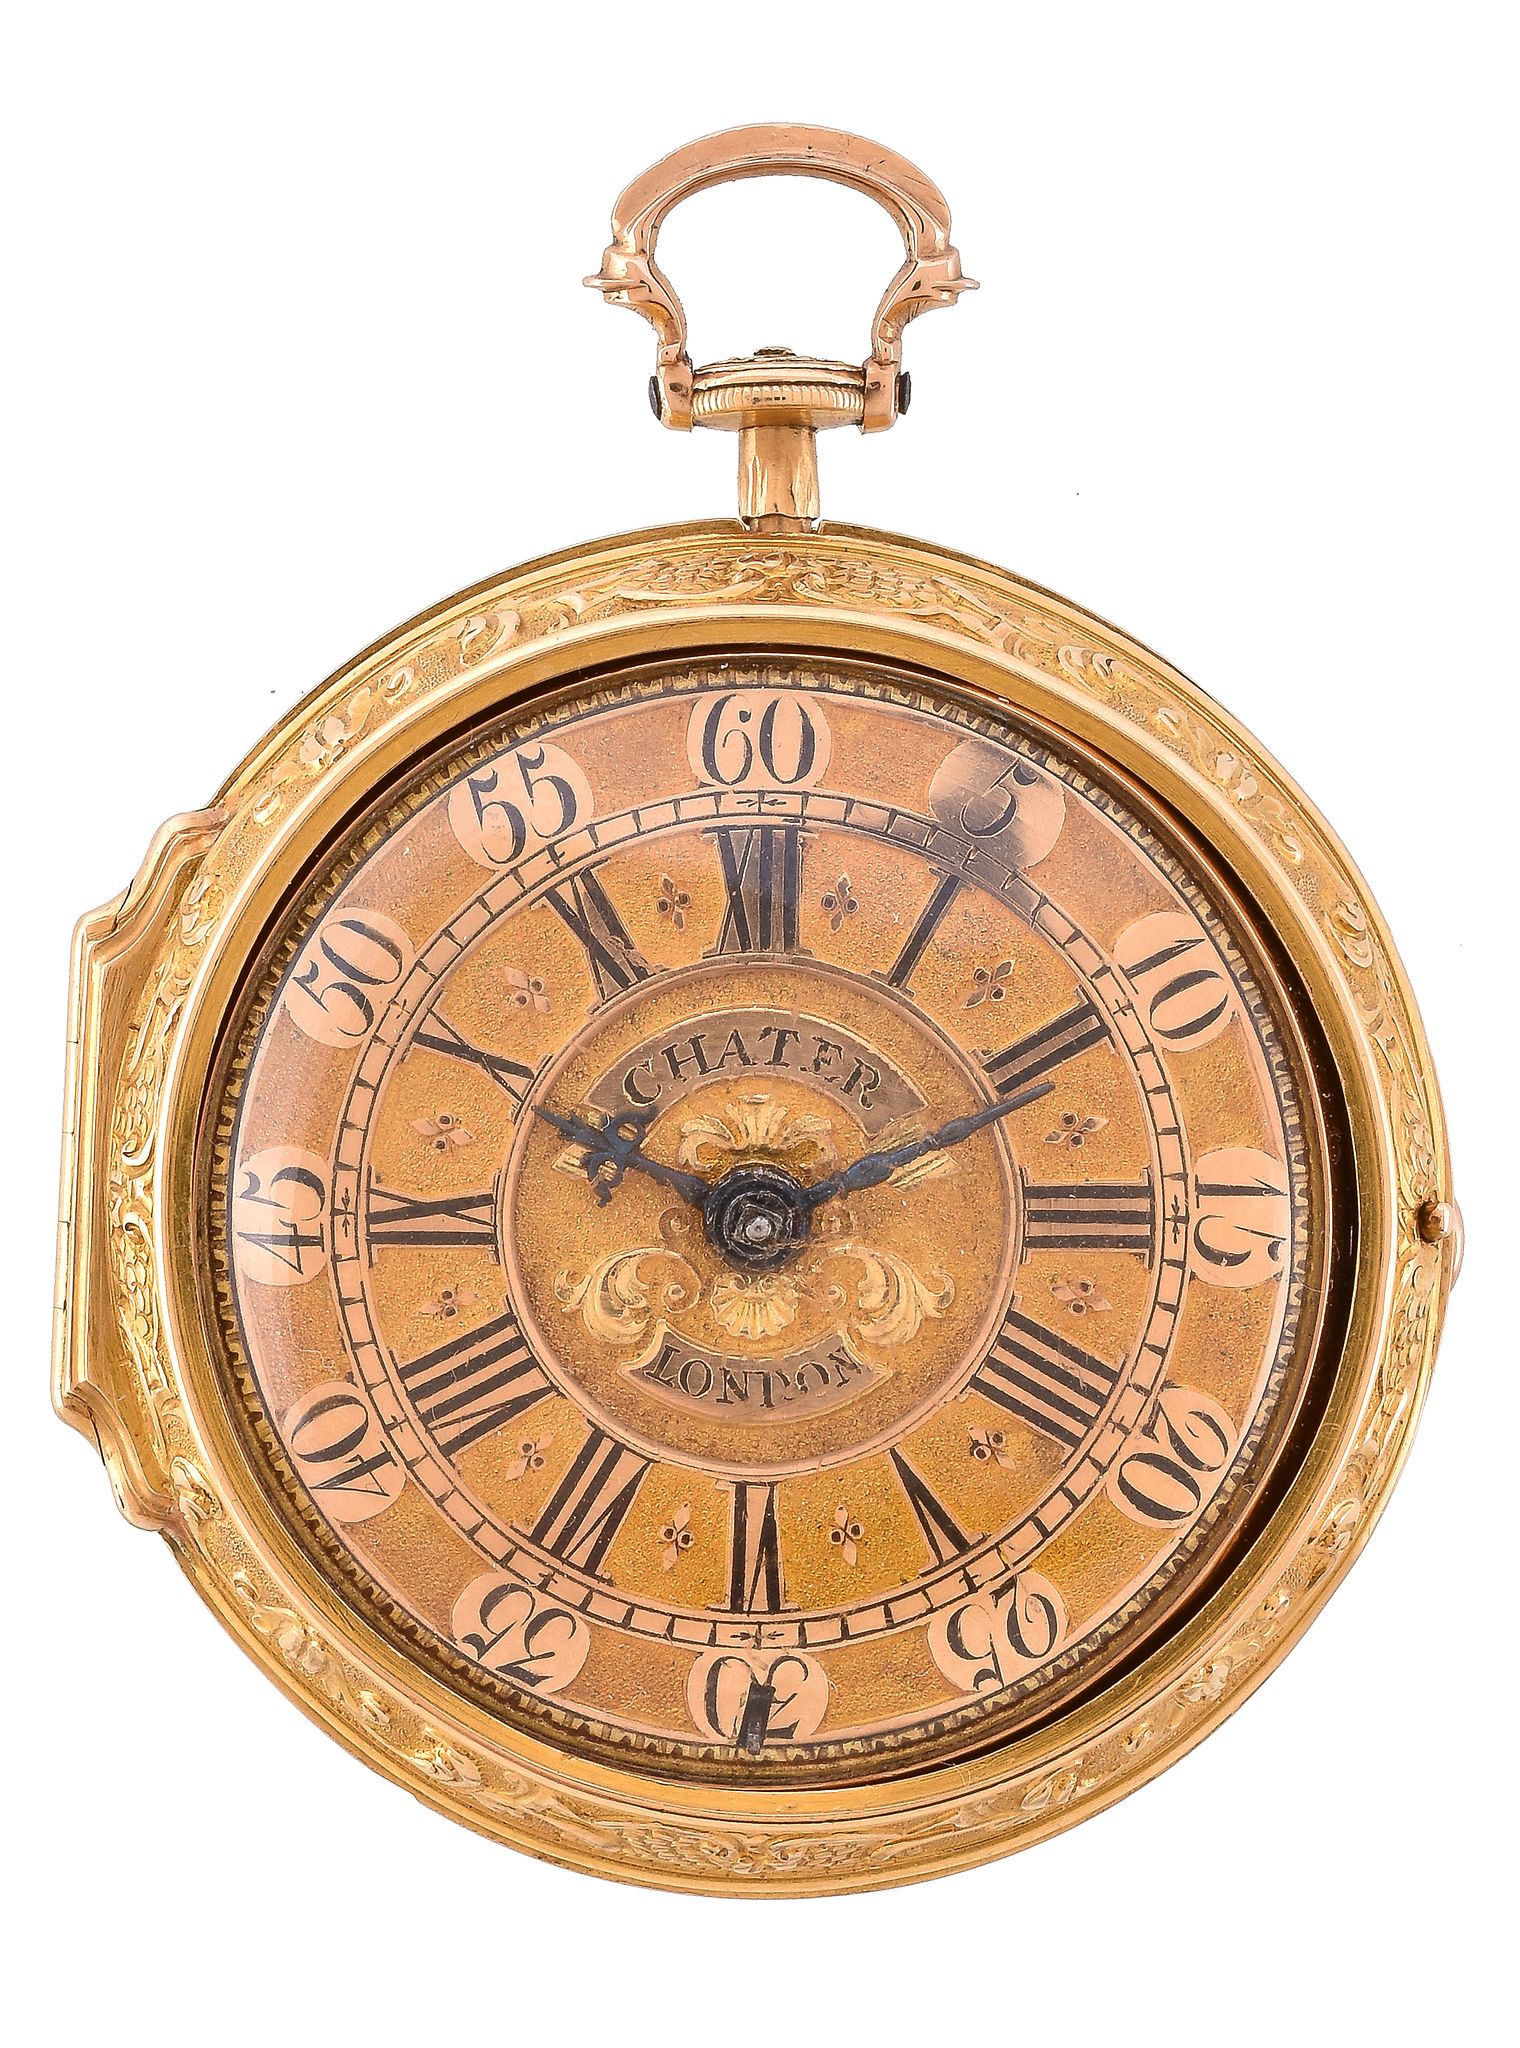 A George II gold pair-cased pocket watch with champleve dial and repousse outer case James Chater,